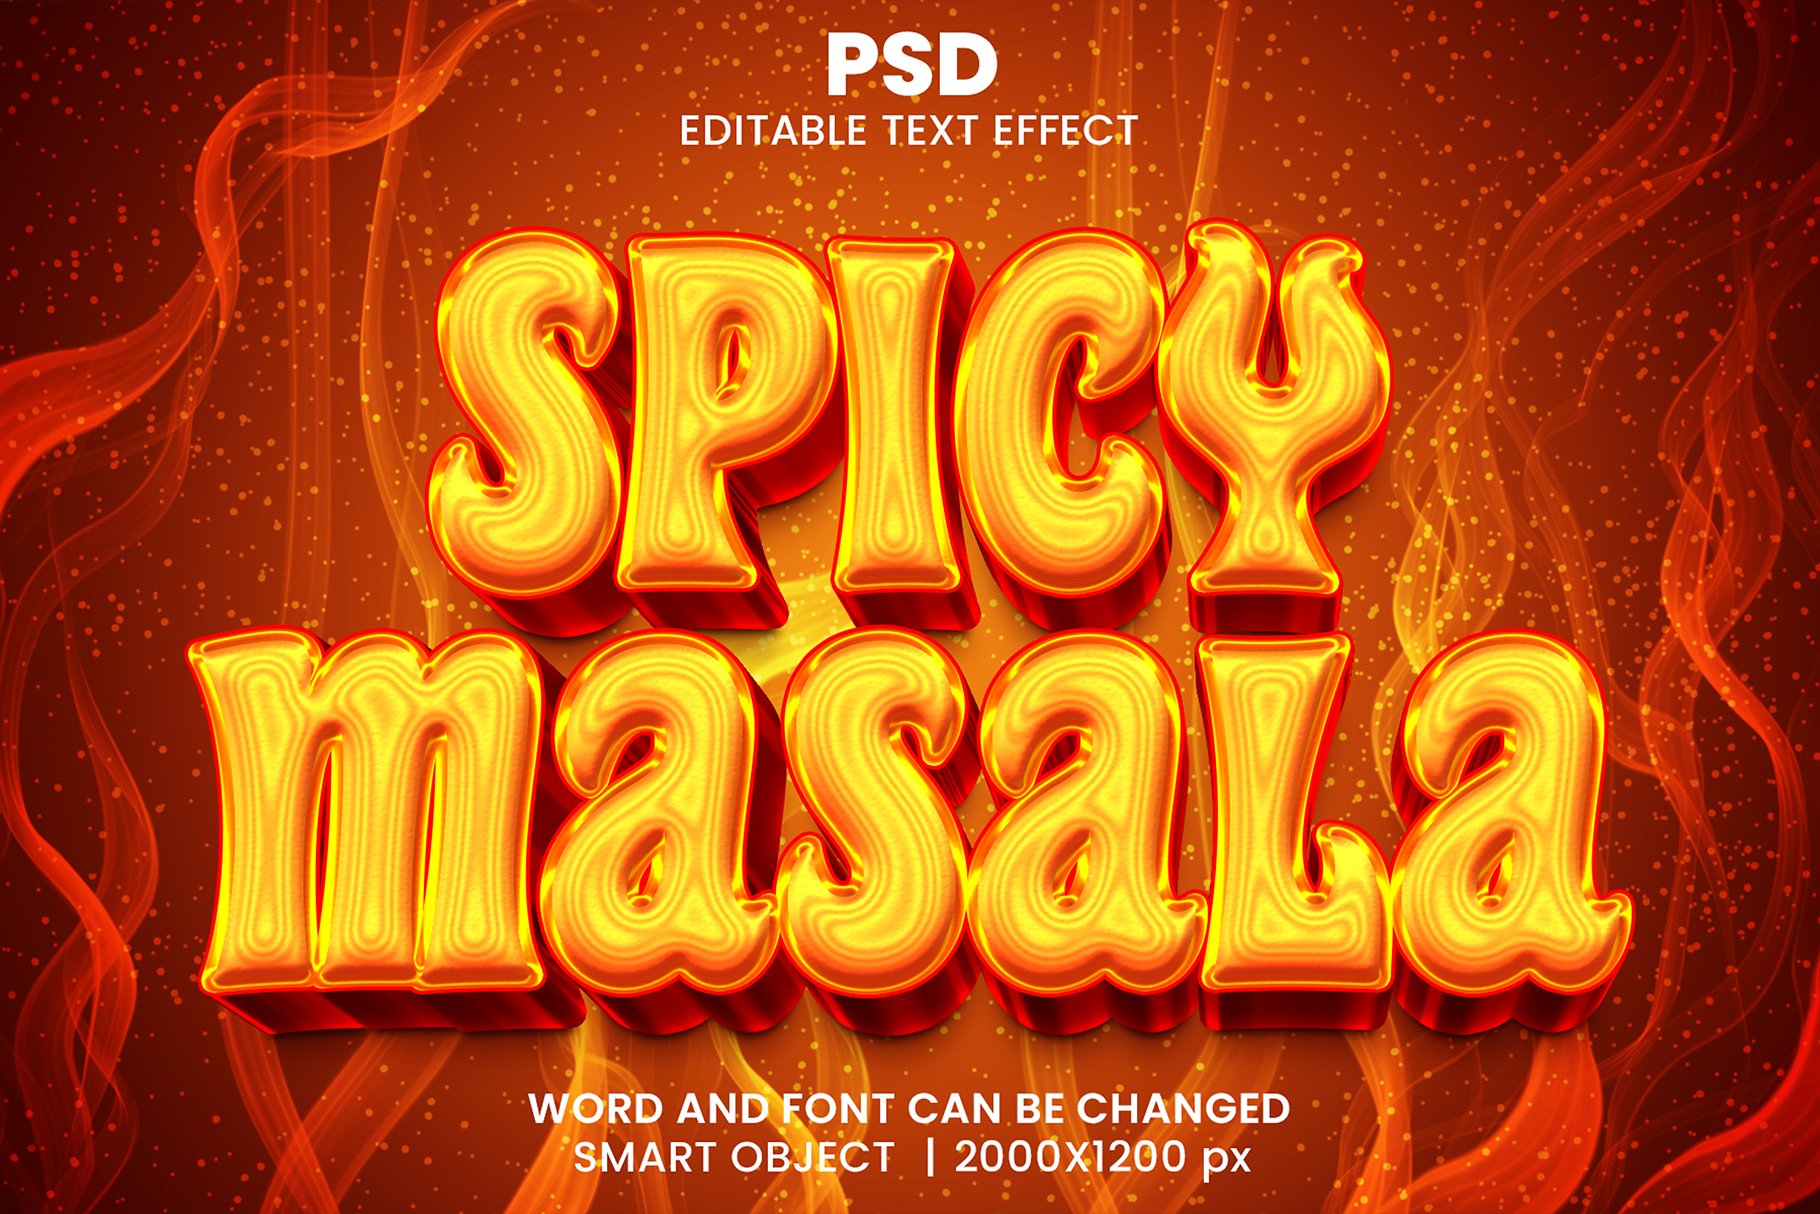 Spicy 3d Text Effect Style PSDcover image.